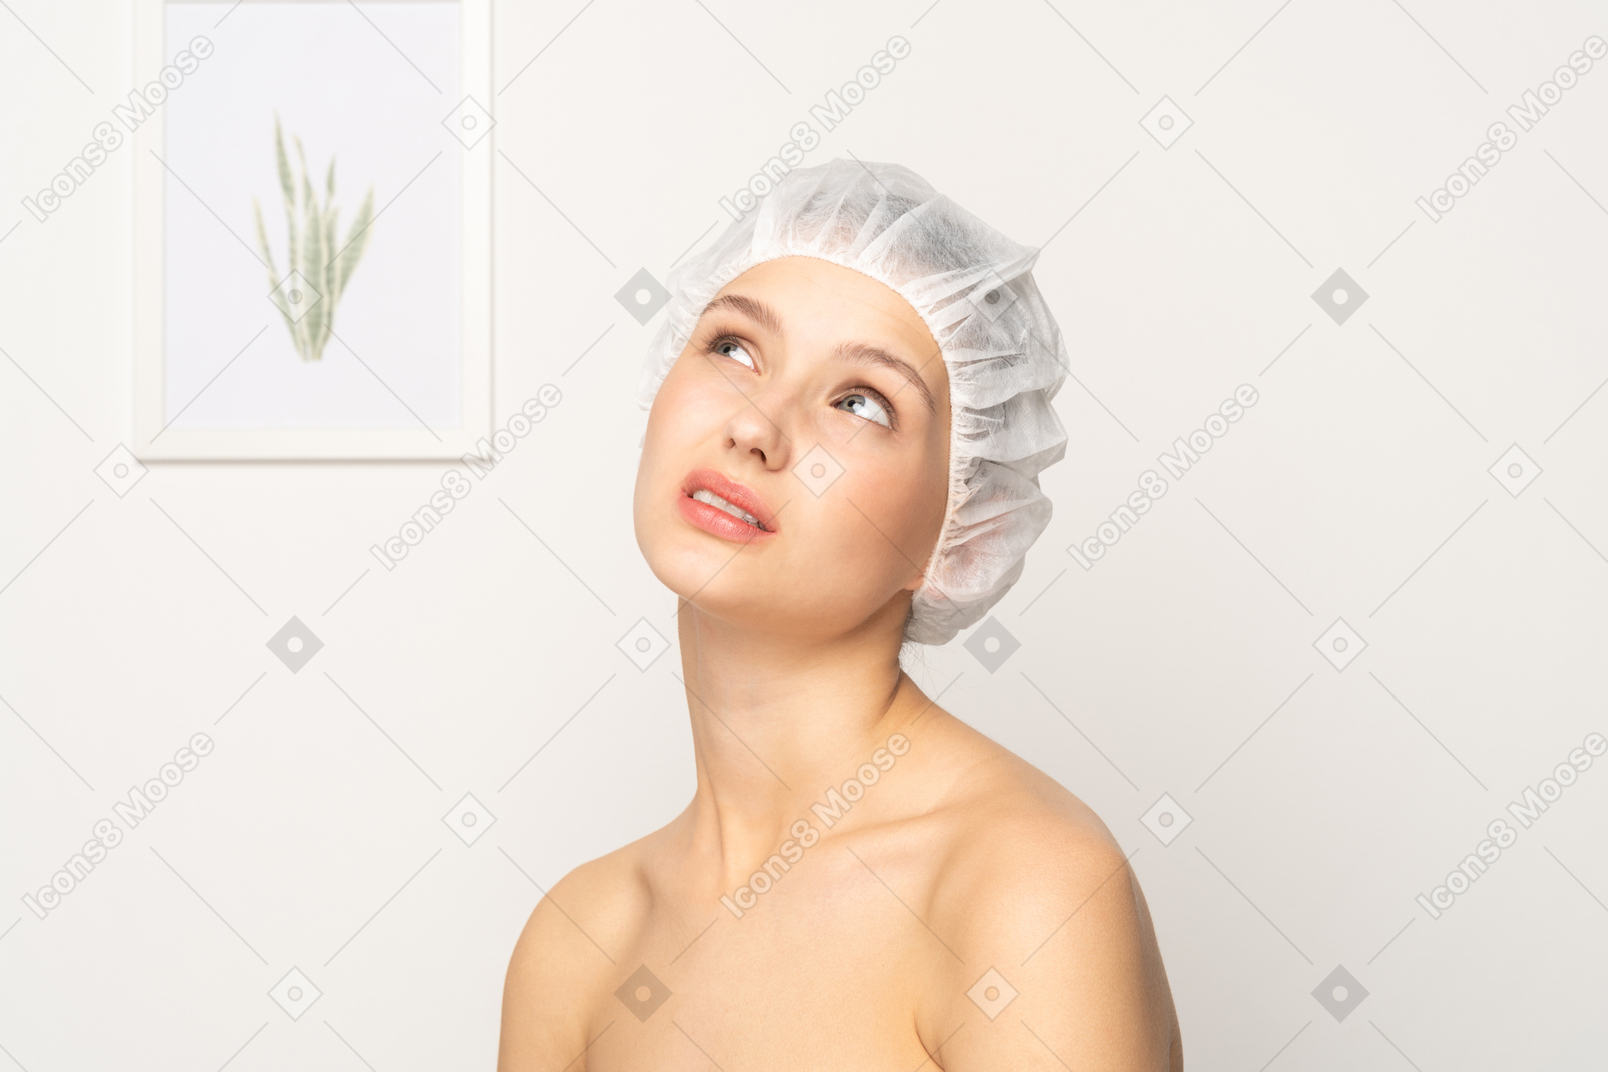 Doubting woman in medical cap looking up